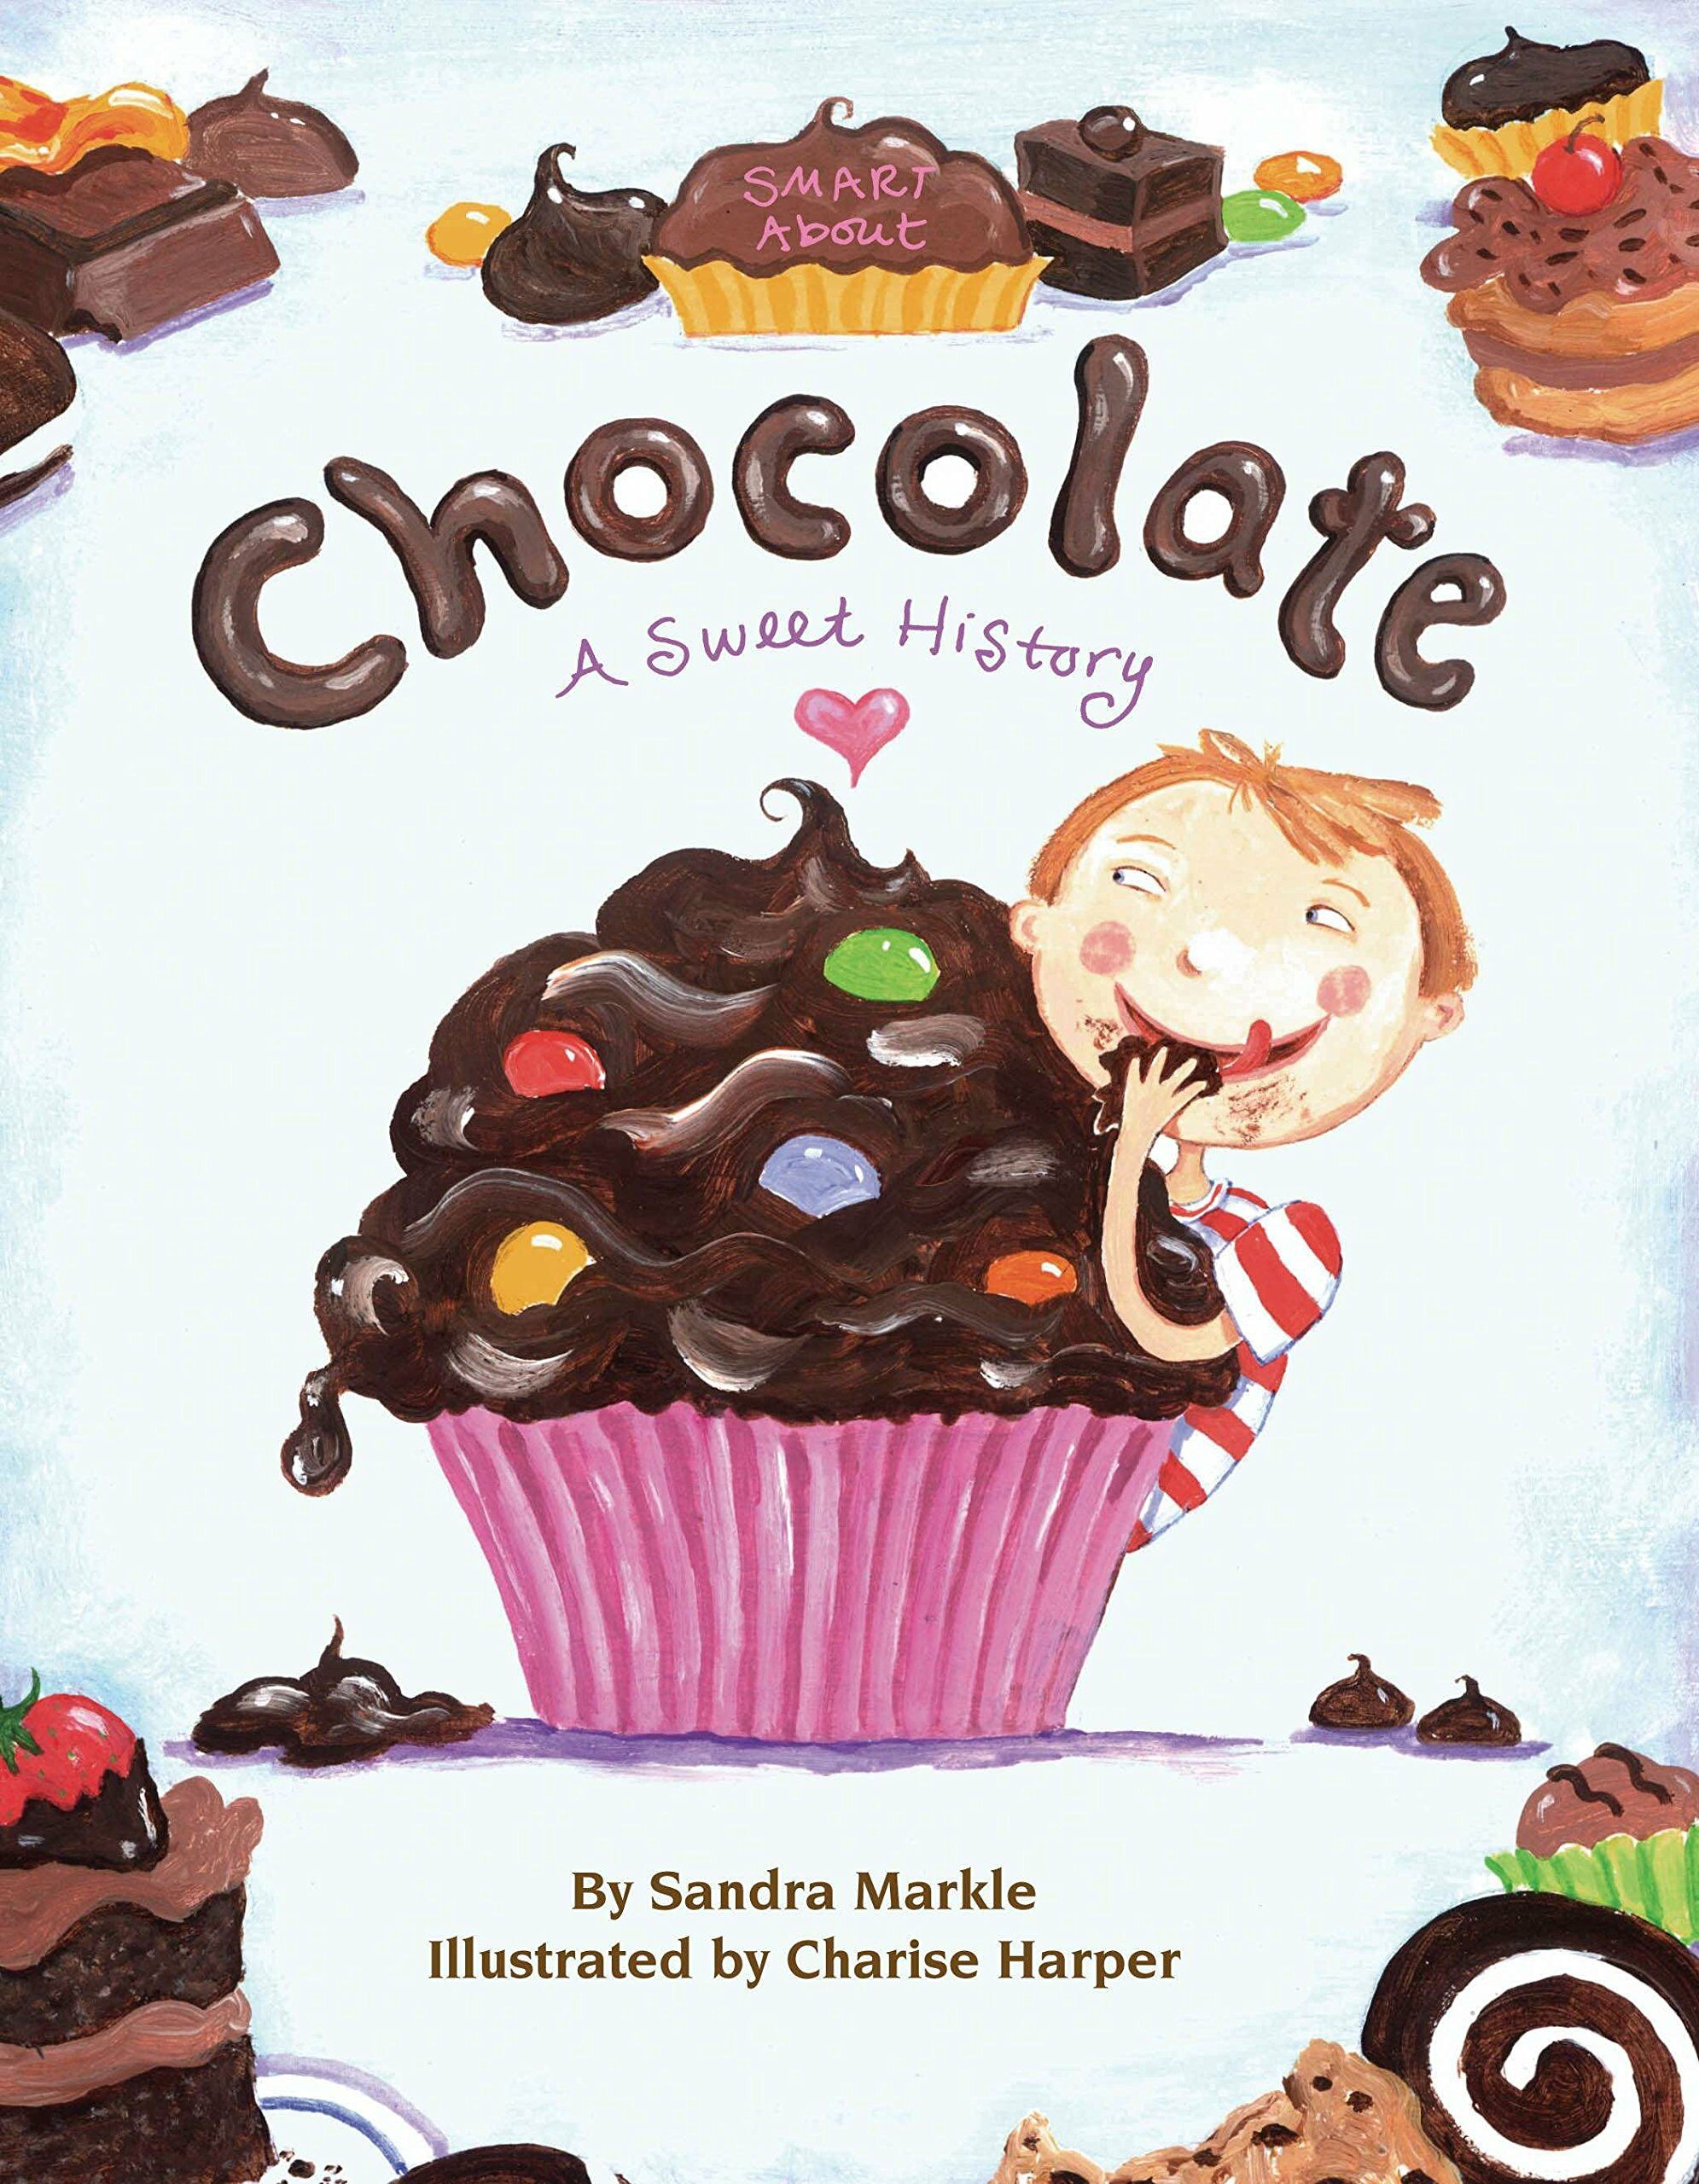 Smart about Chocolate: A Sweet History (Paperback)